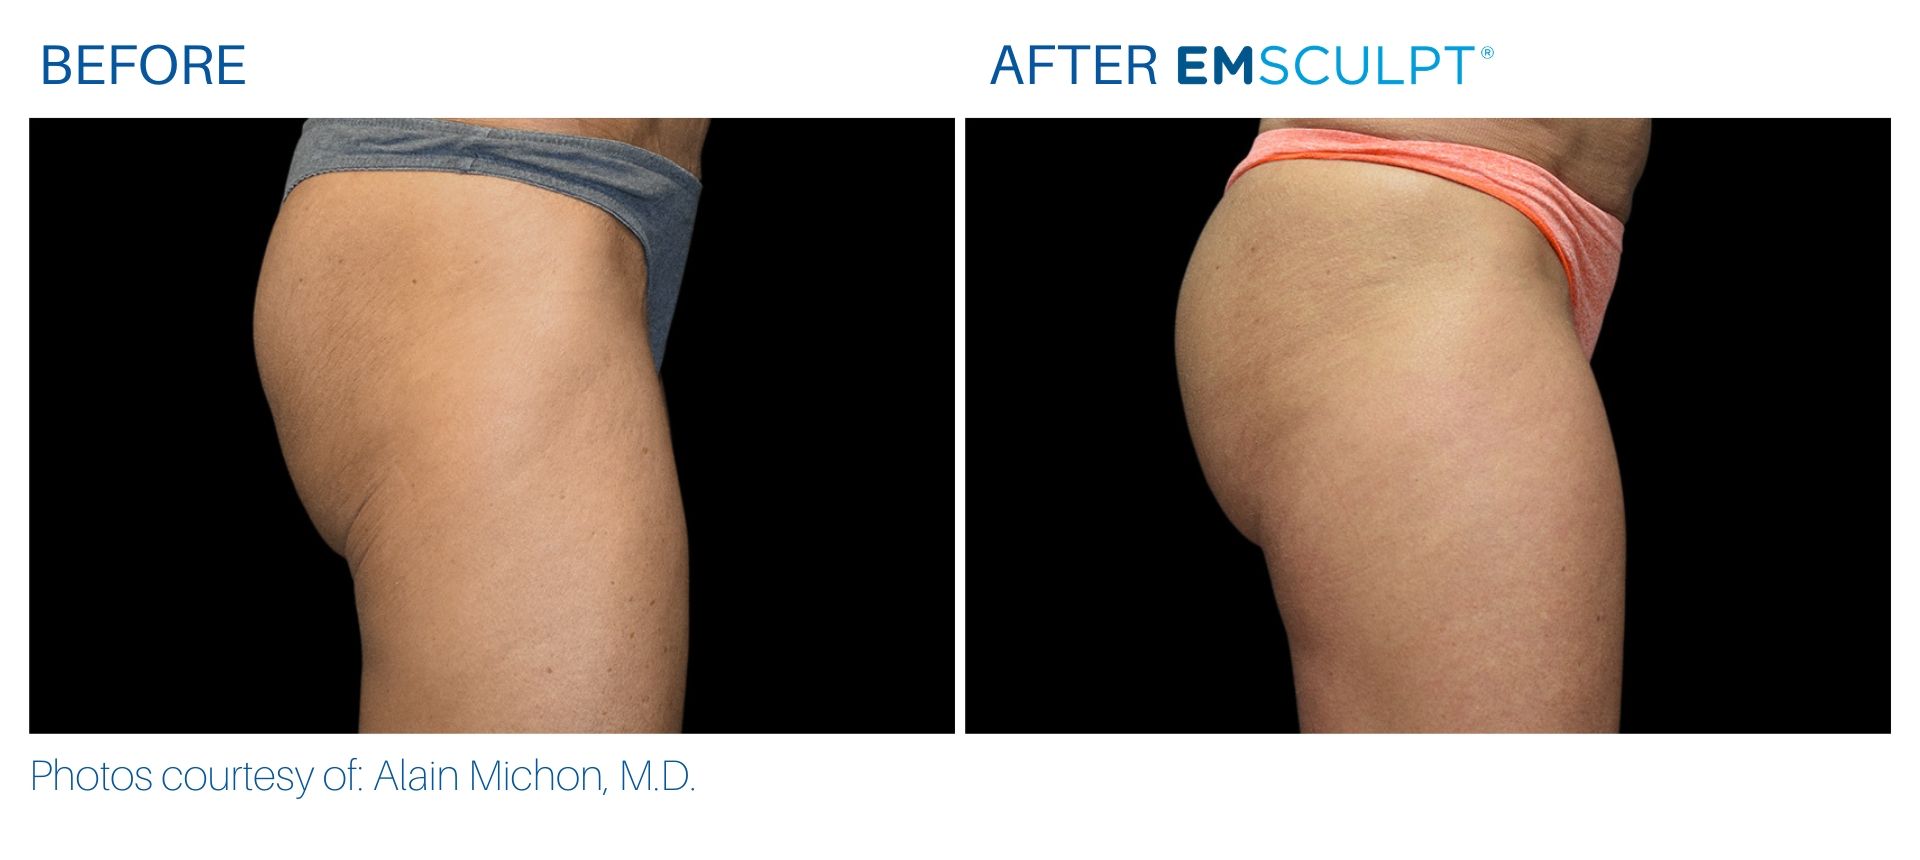 Emsculpt before and after Butt at Body Reflections in Somers, CT